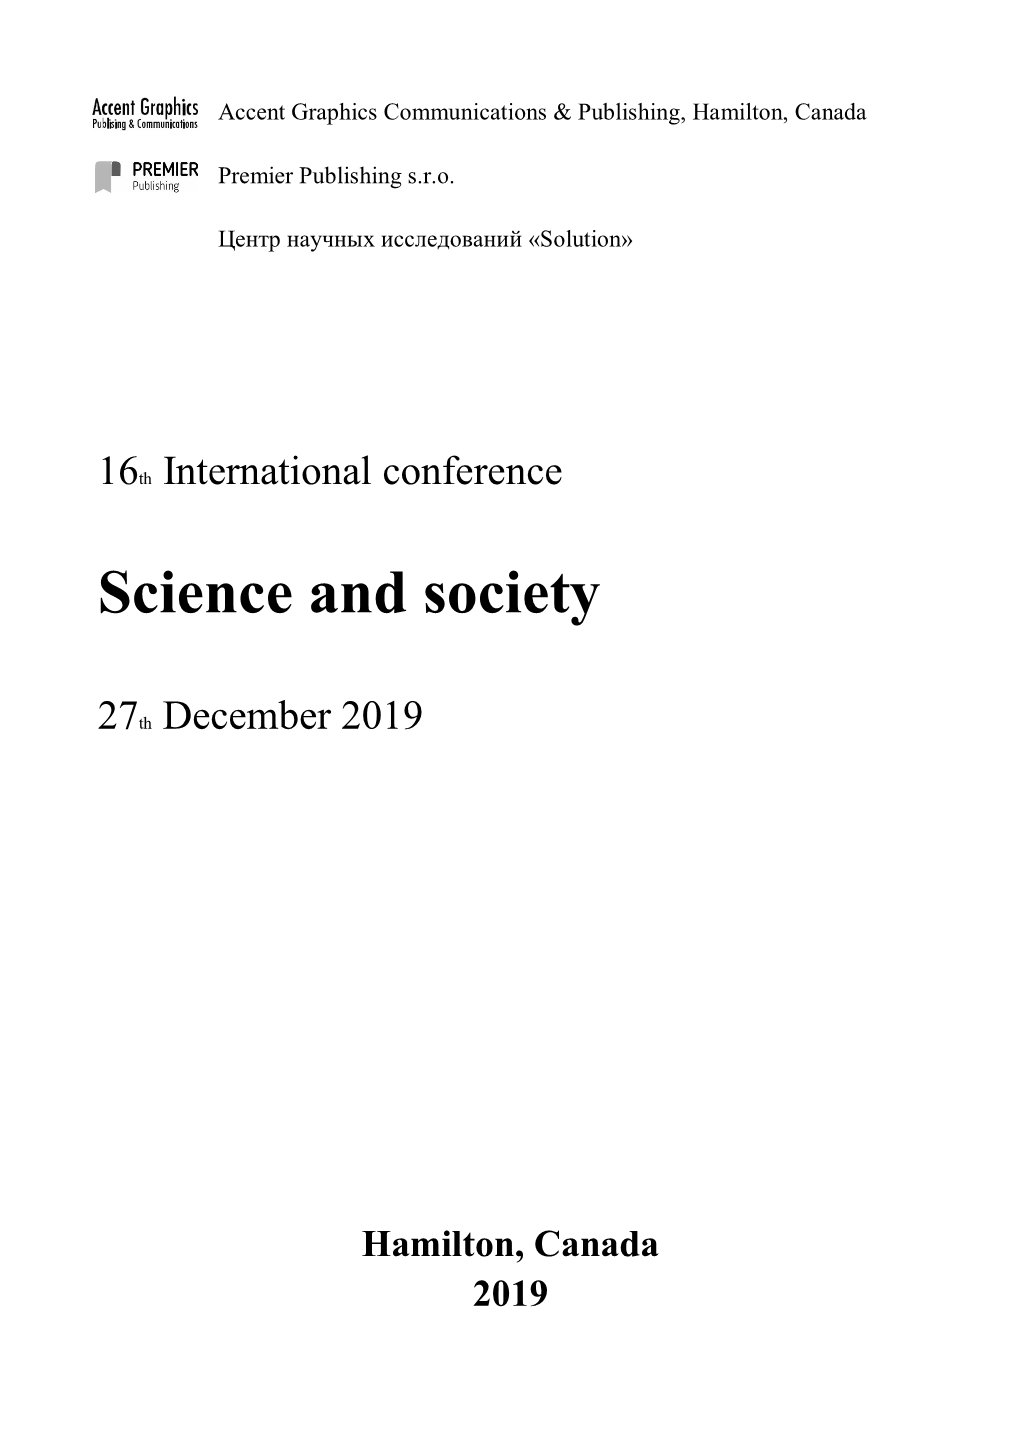 16Th International Conference “ Science and Society” (December 27, 2019) Accent Graphics Communications & Publishing, Hamilton, Canada